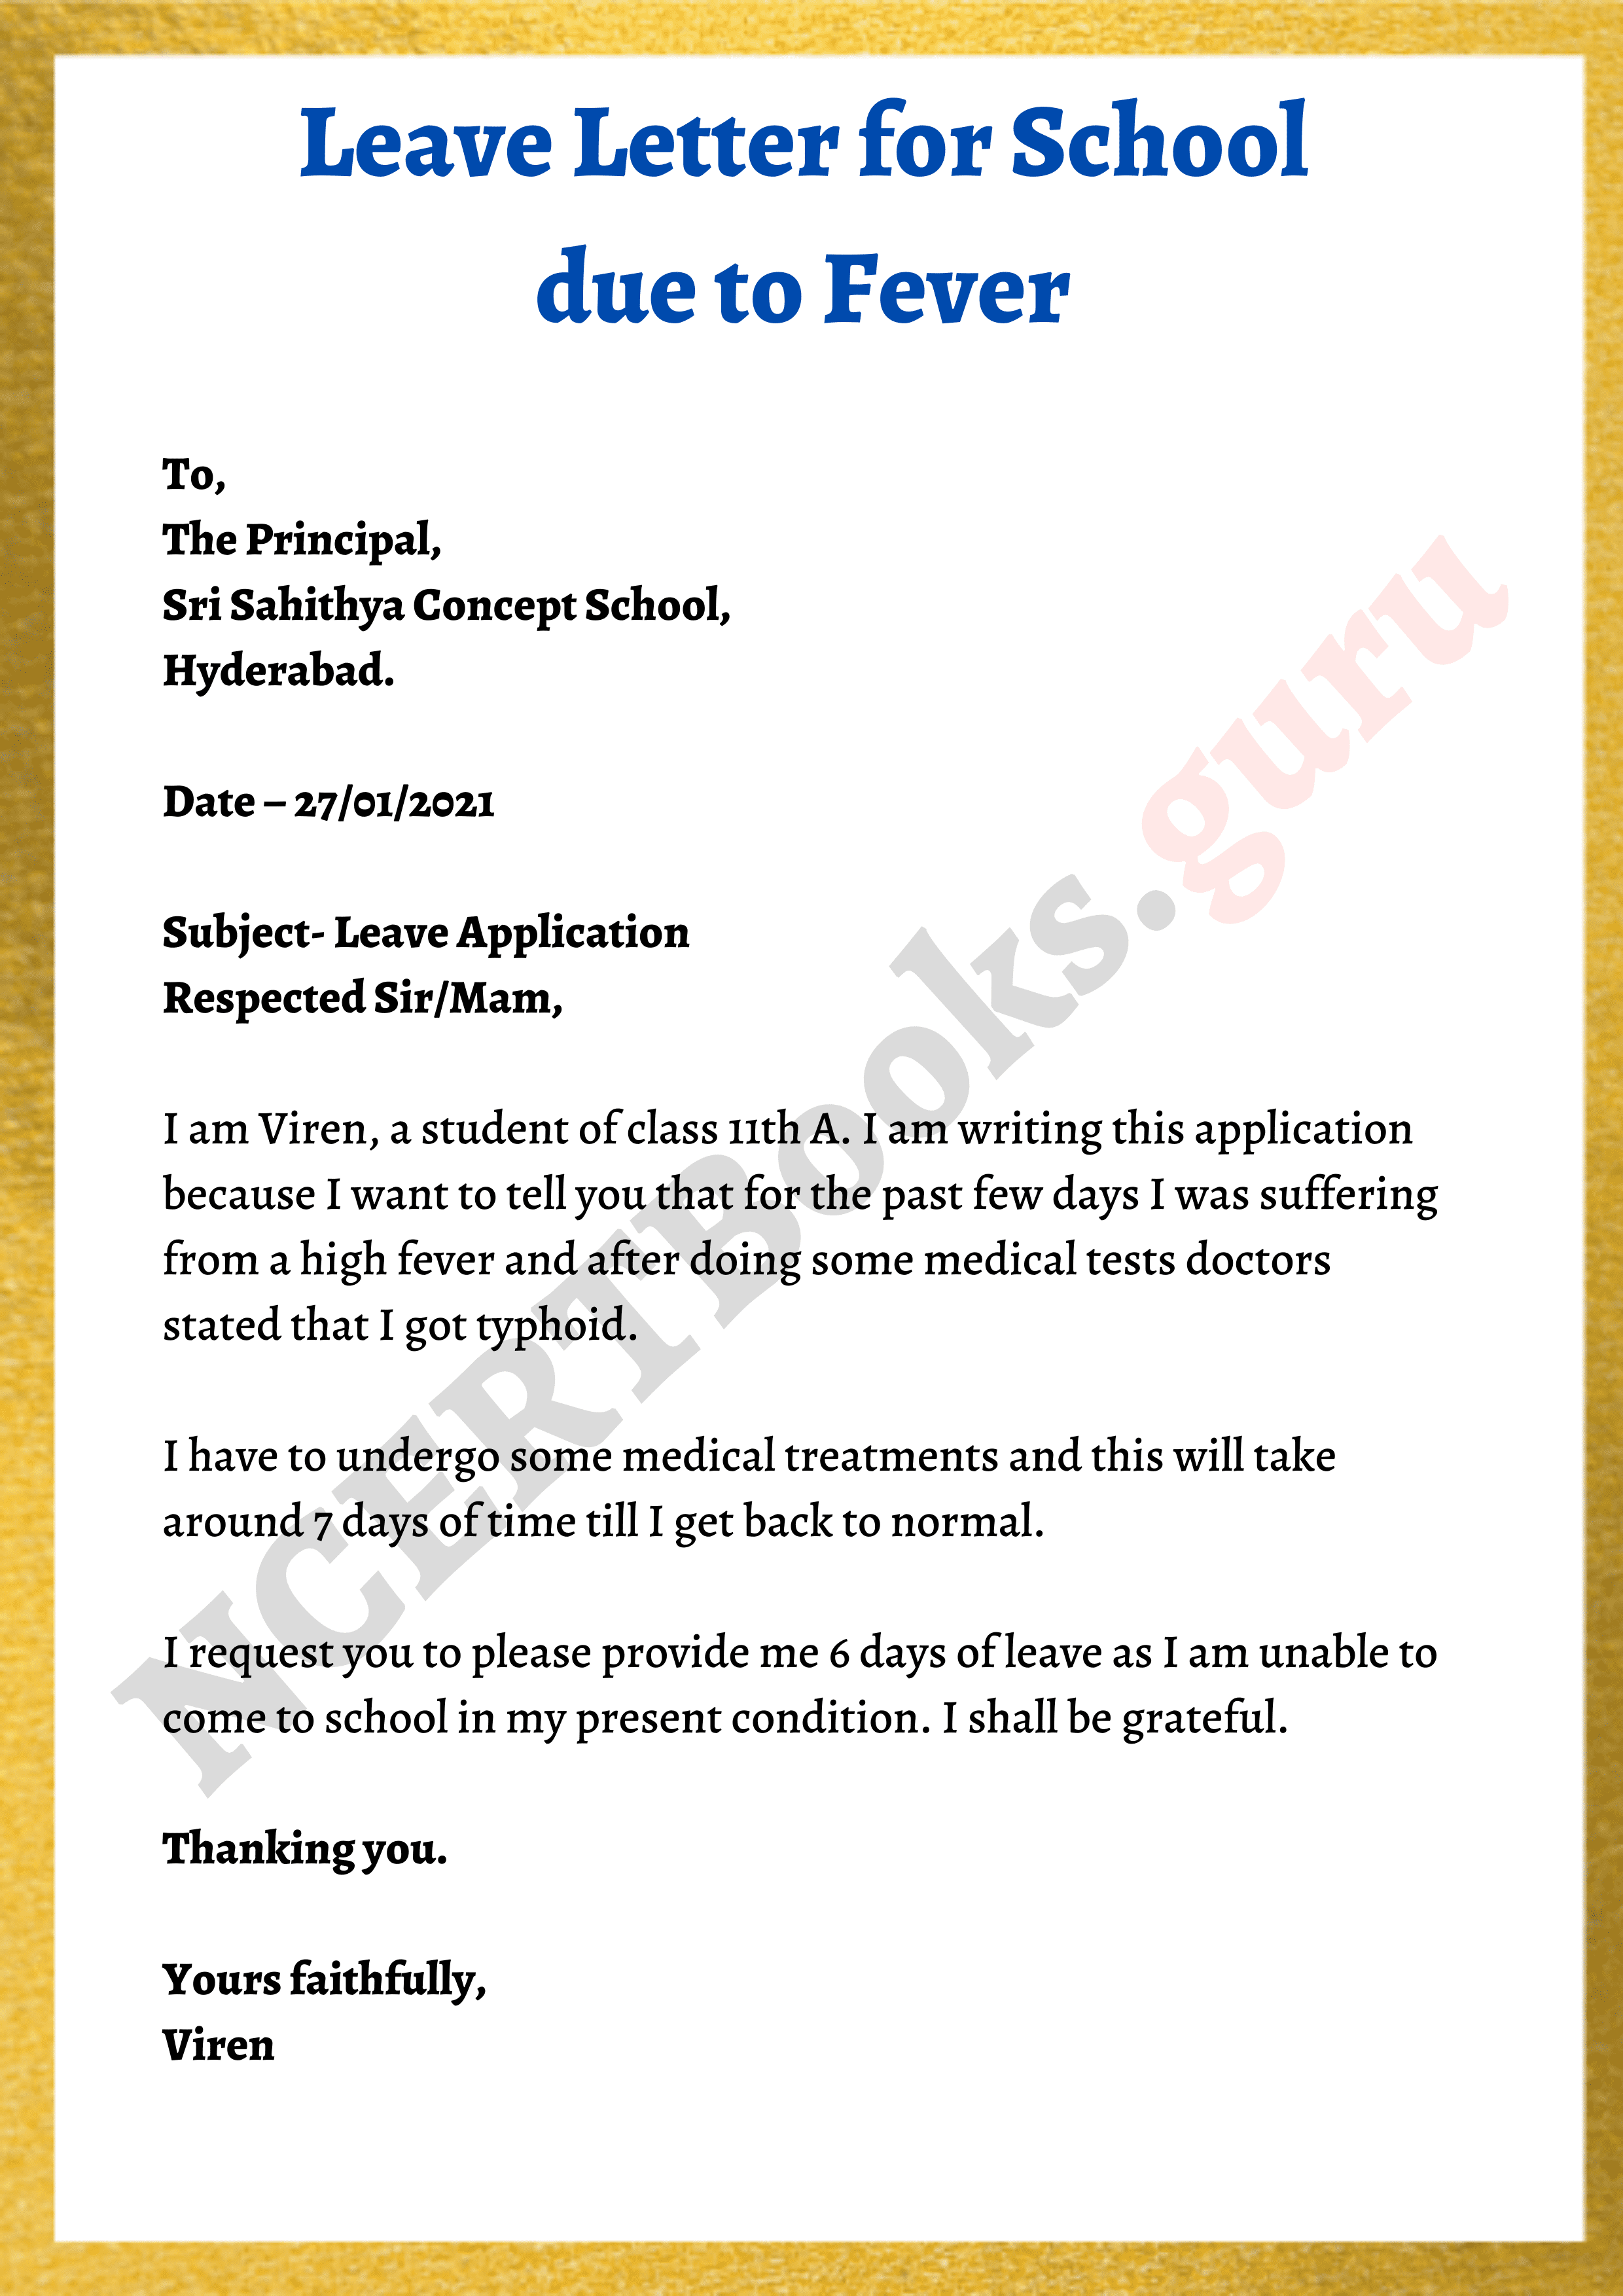 application letter for sick leave in school